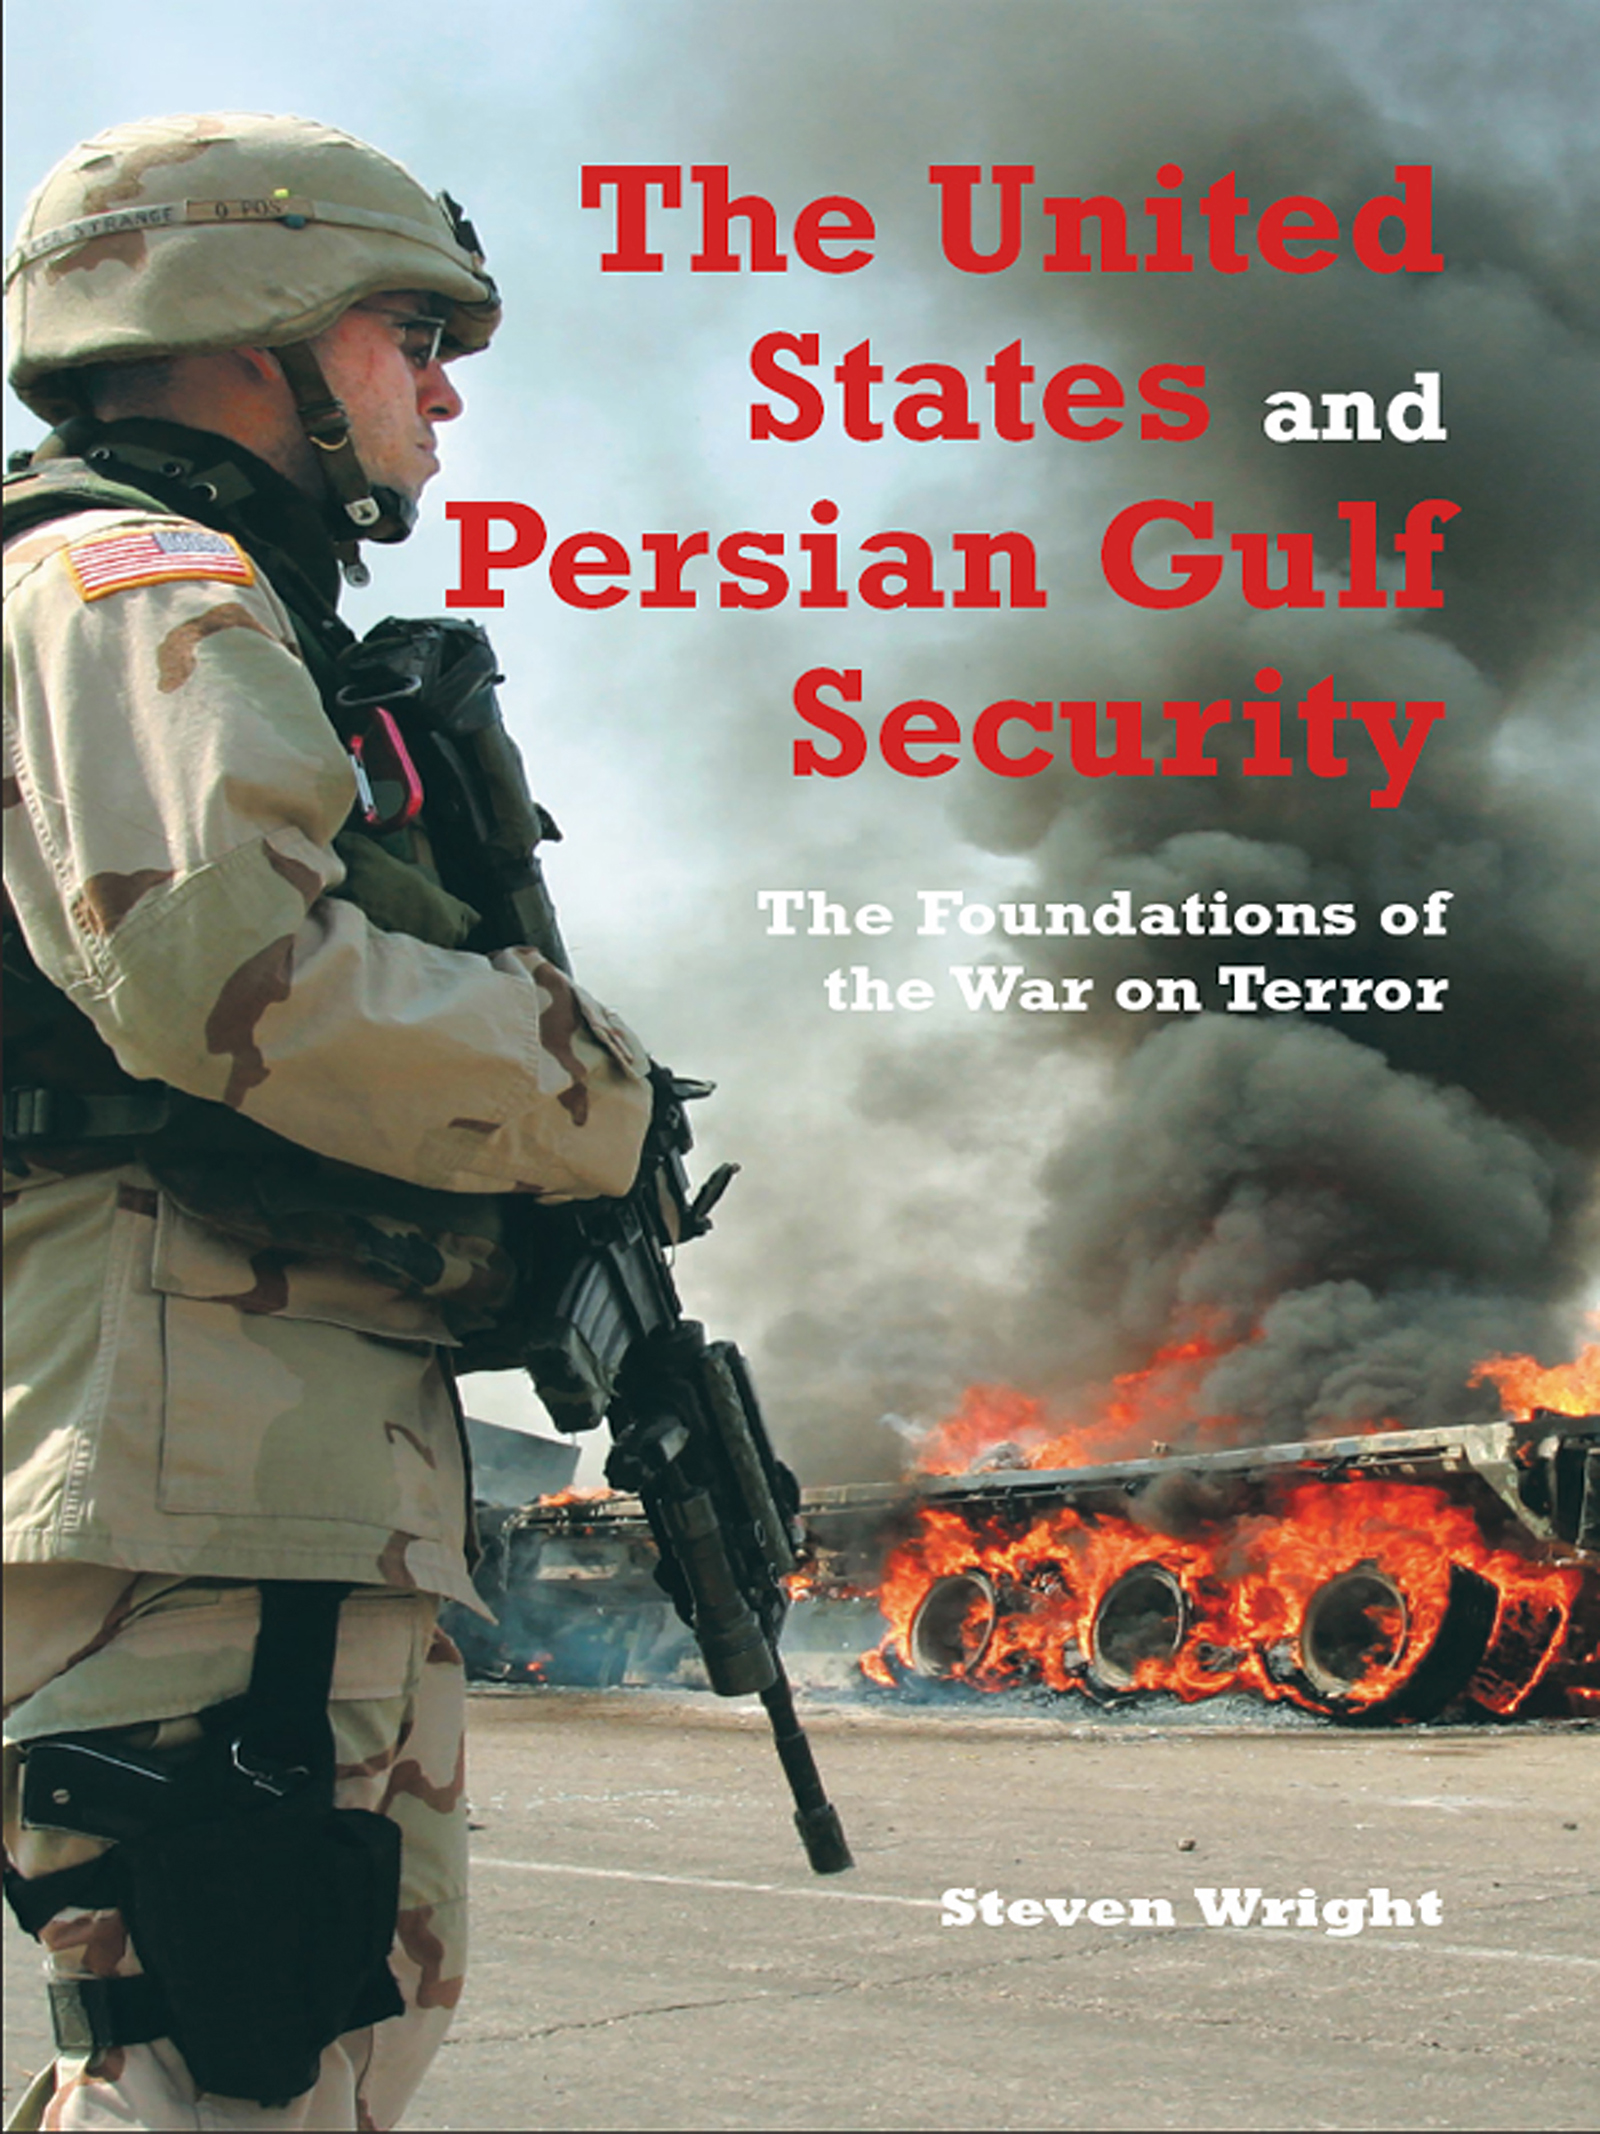 The United States and Persian Gulf Security - 10-14.99